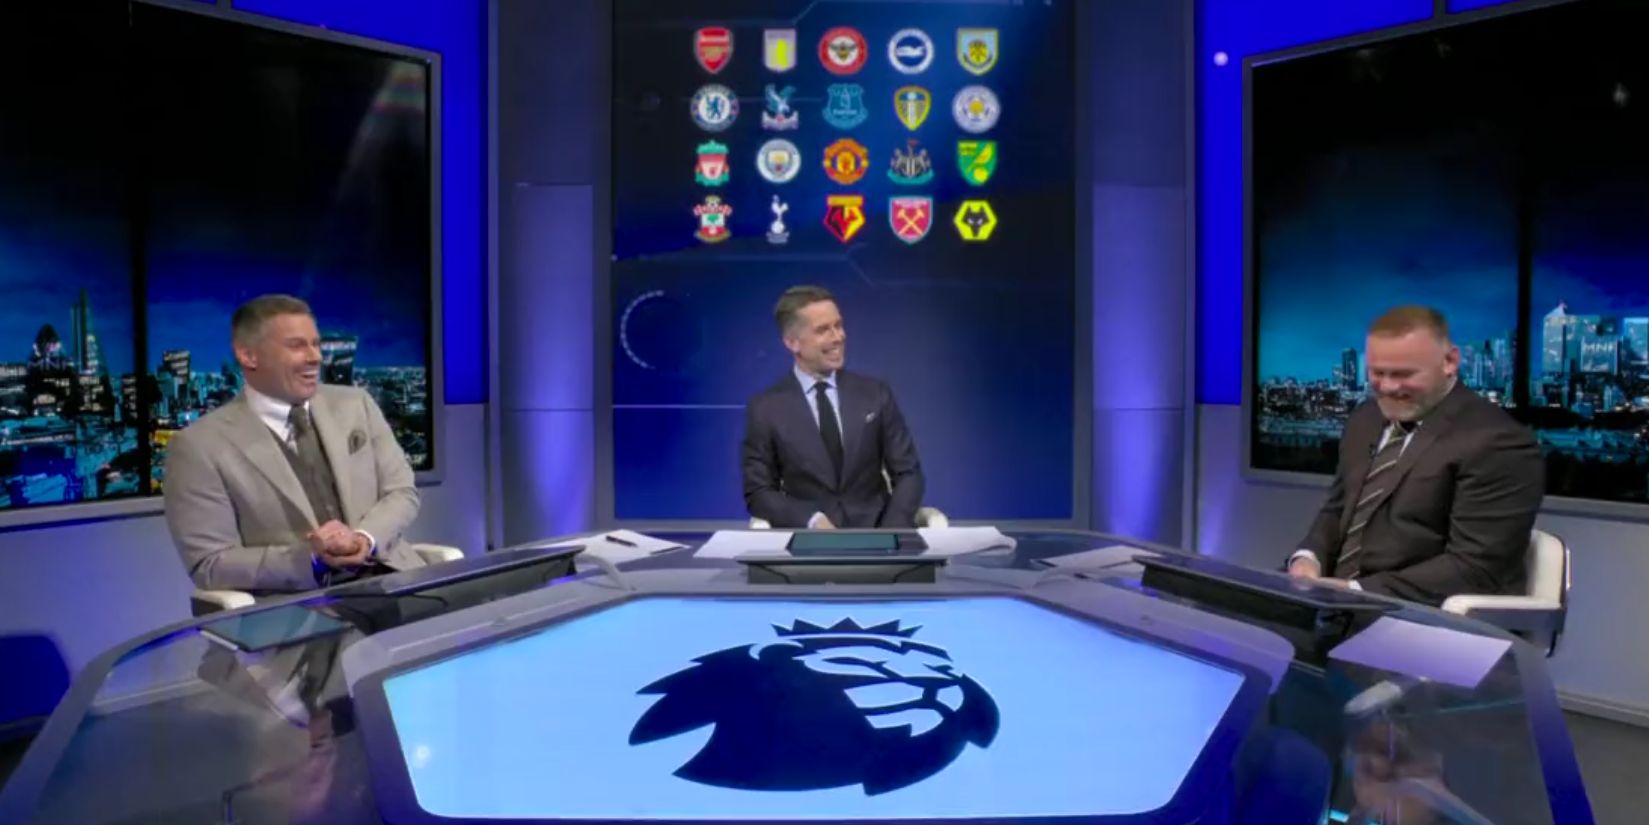 (Video) Wayne Rooney and Jamie Carragher disagree on Robbie Fowler’s place in the Premier League Hall of Fame